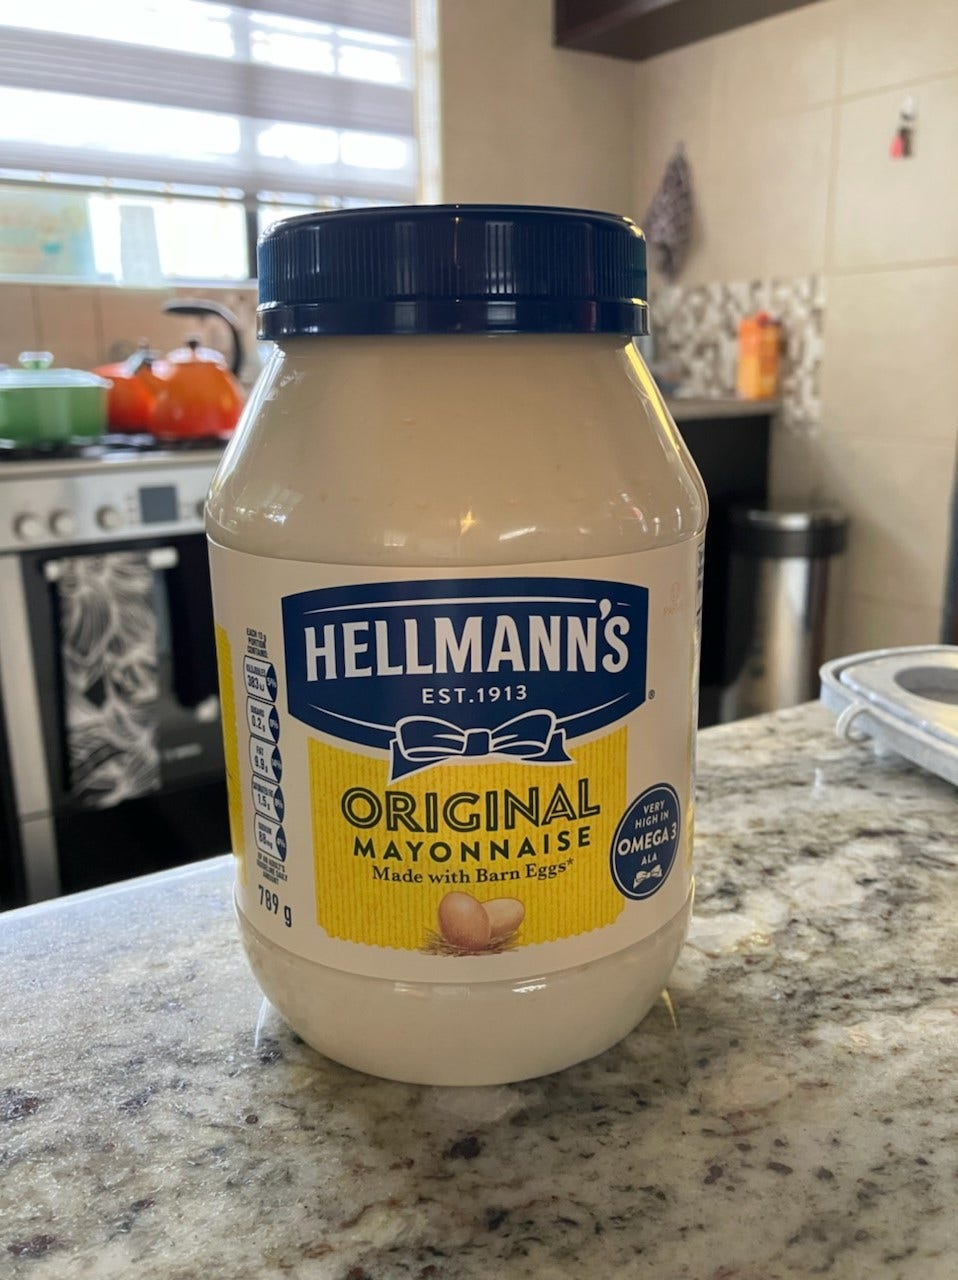 Shoppers fume as iconic mayo brand dropped from country's shelves, 'high inflationary import costs' blamed